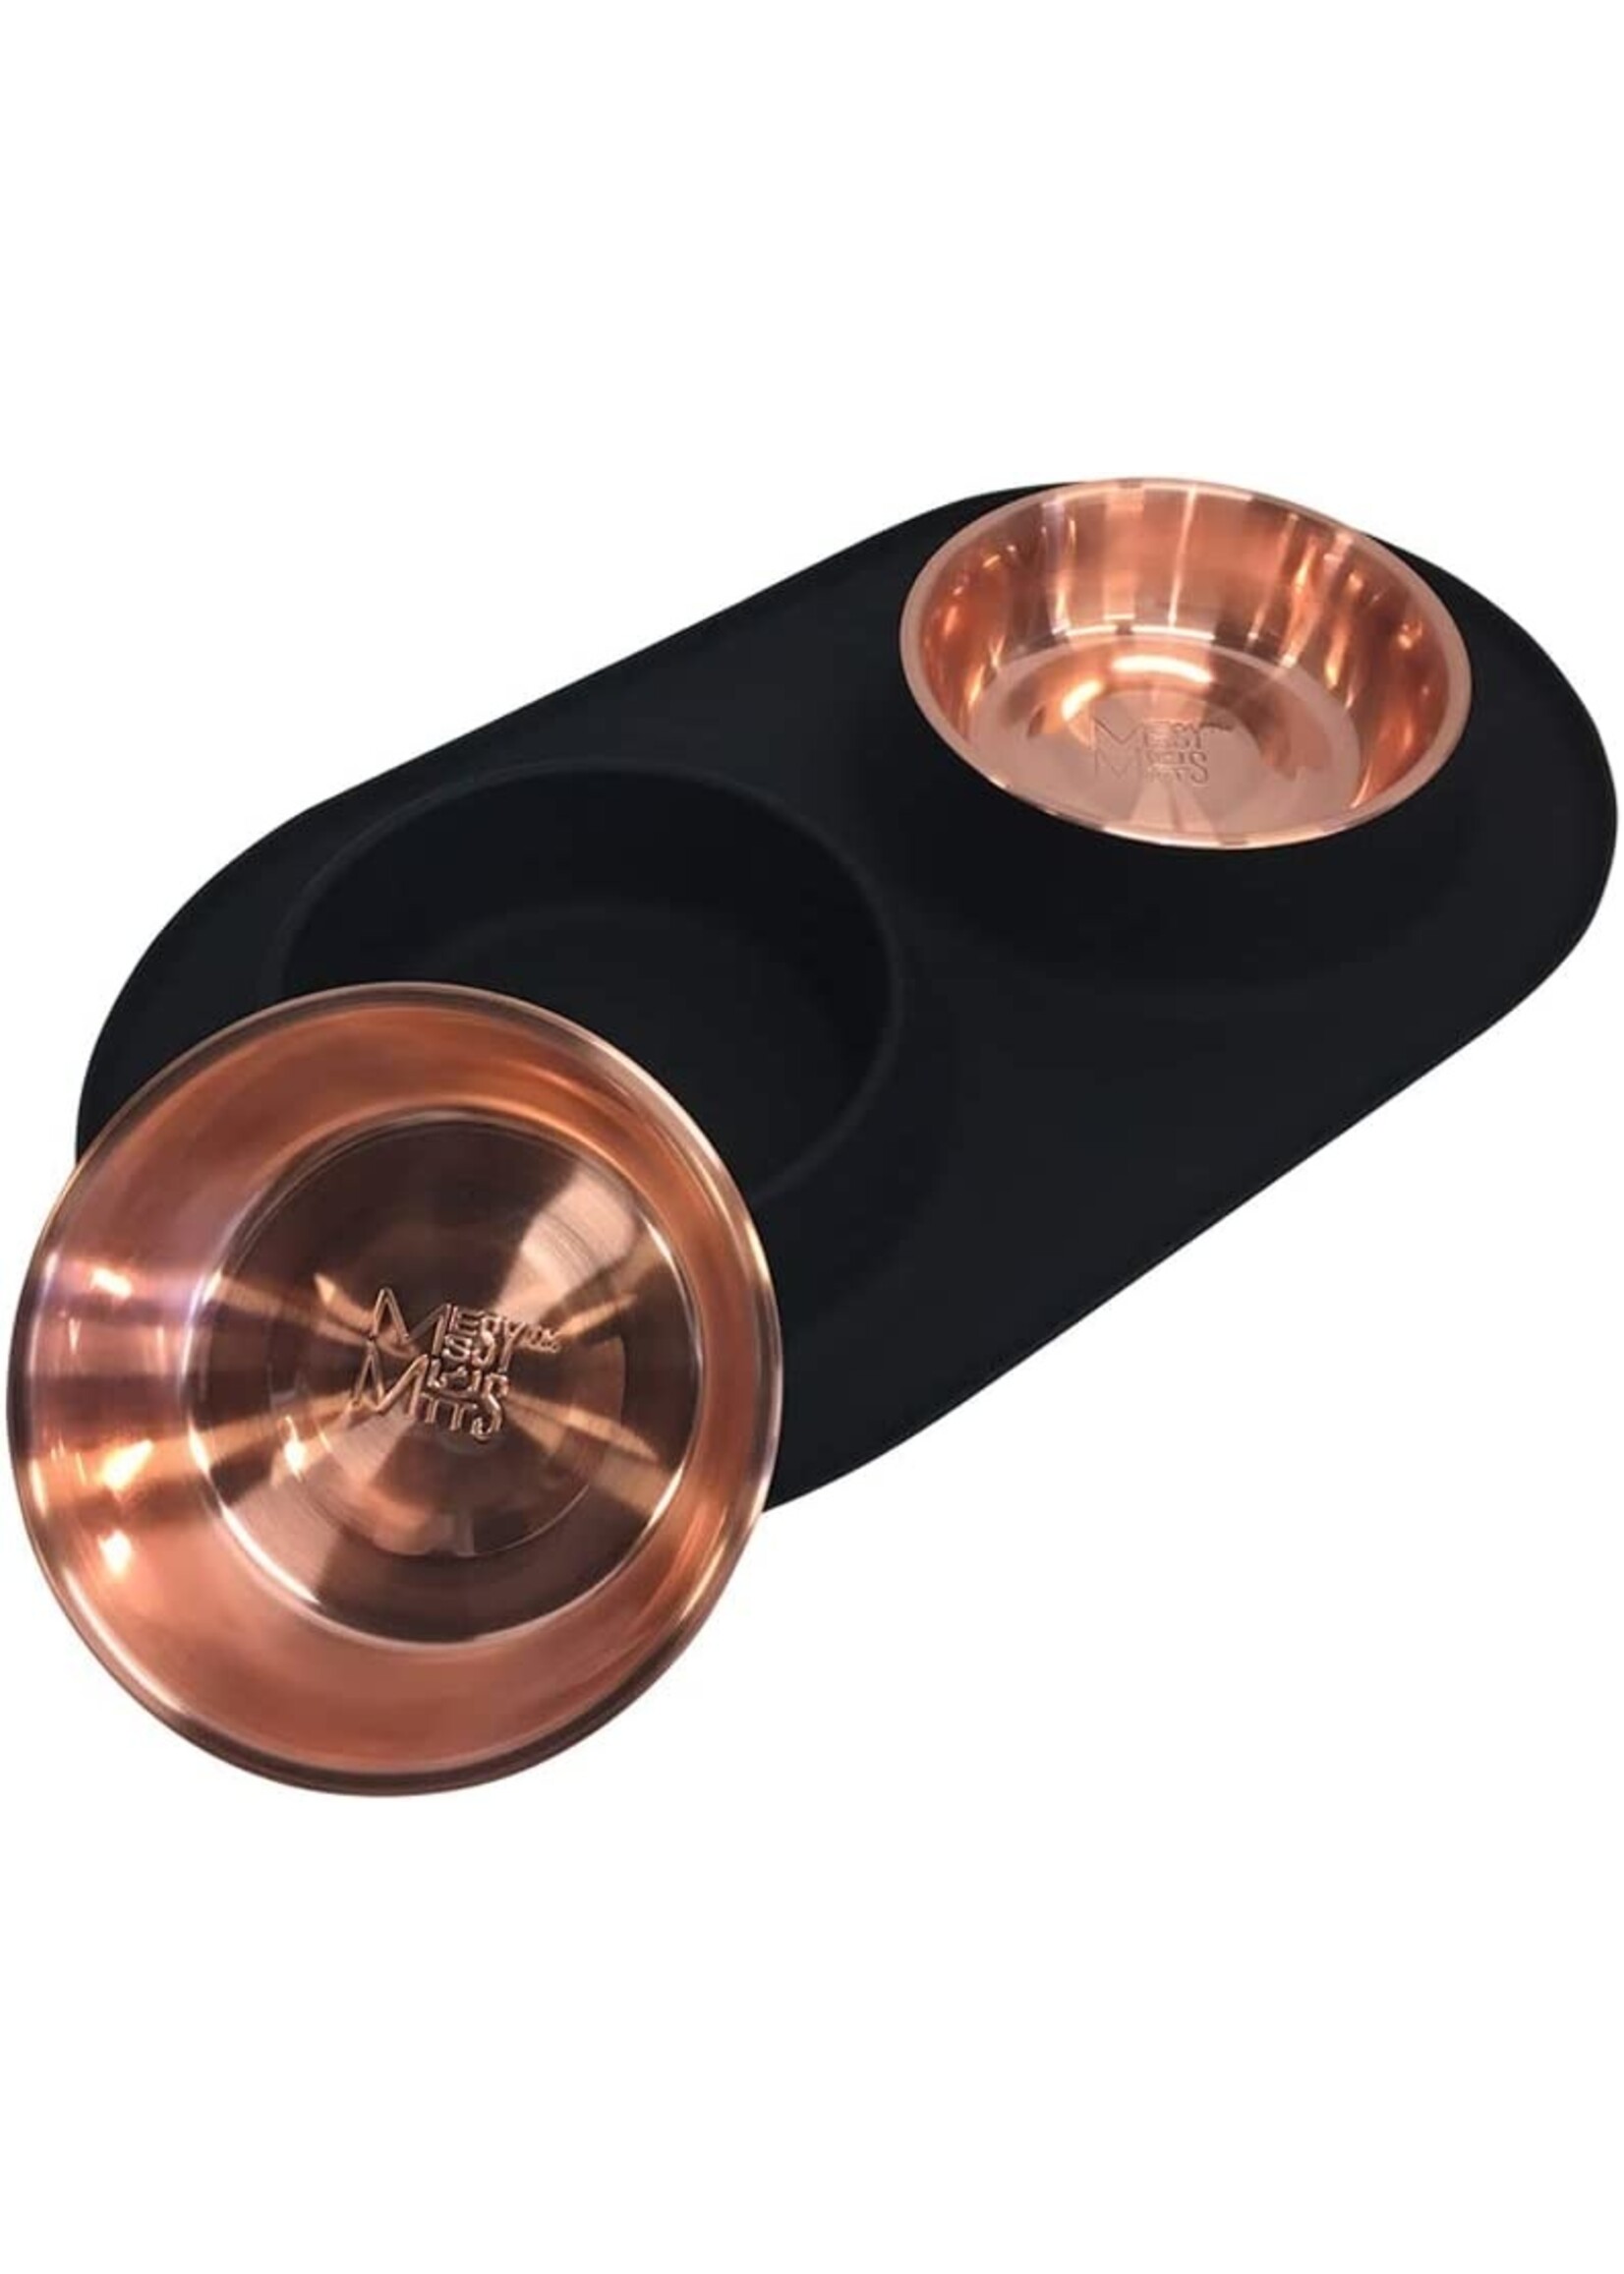 Messy Mutts Messy Mutts Double Silicone Feeder Special Edition Copper